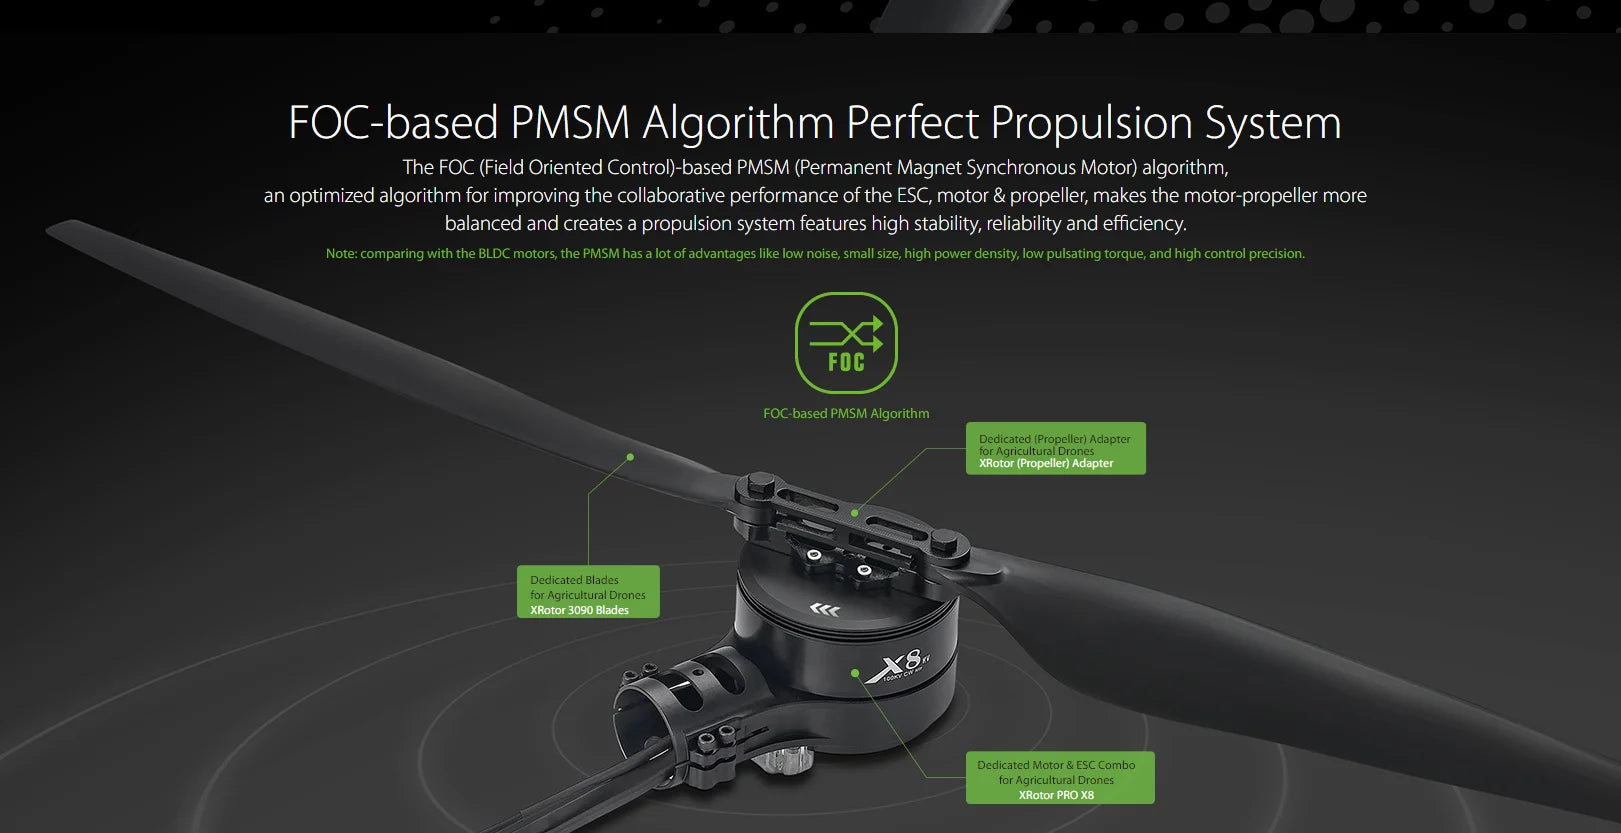 Hobbywing X8 Integrated Style Power System, FOC-based PMSM Algorithm makes the motor-propeller more balanced